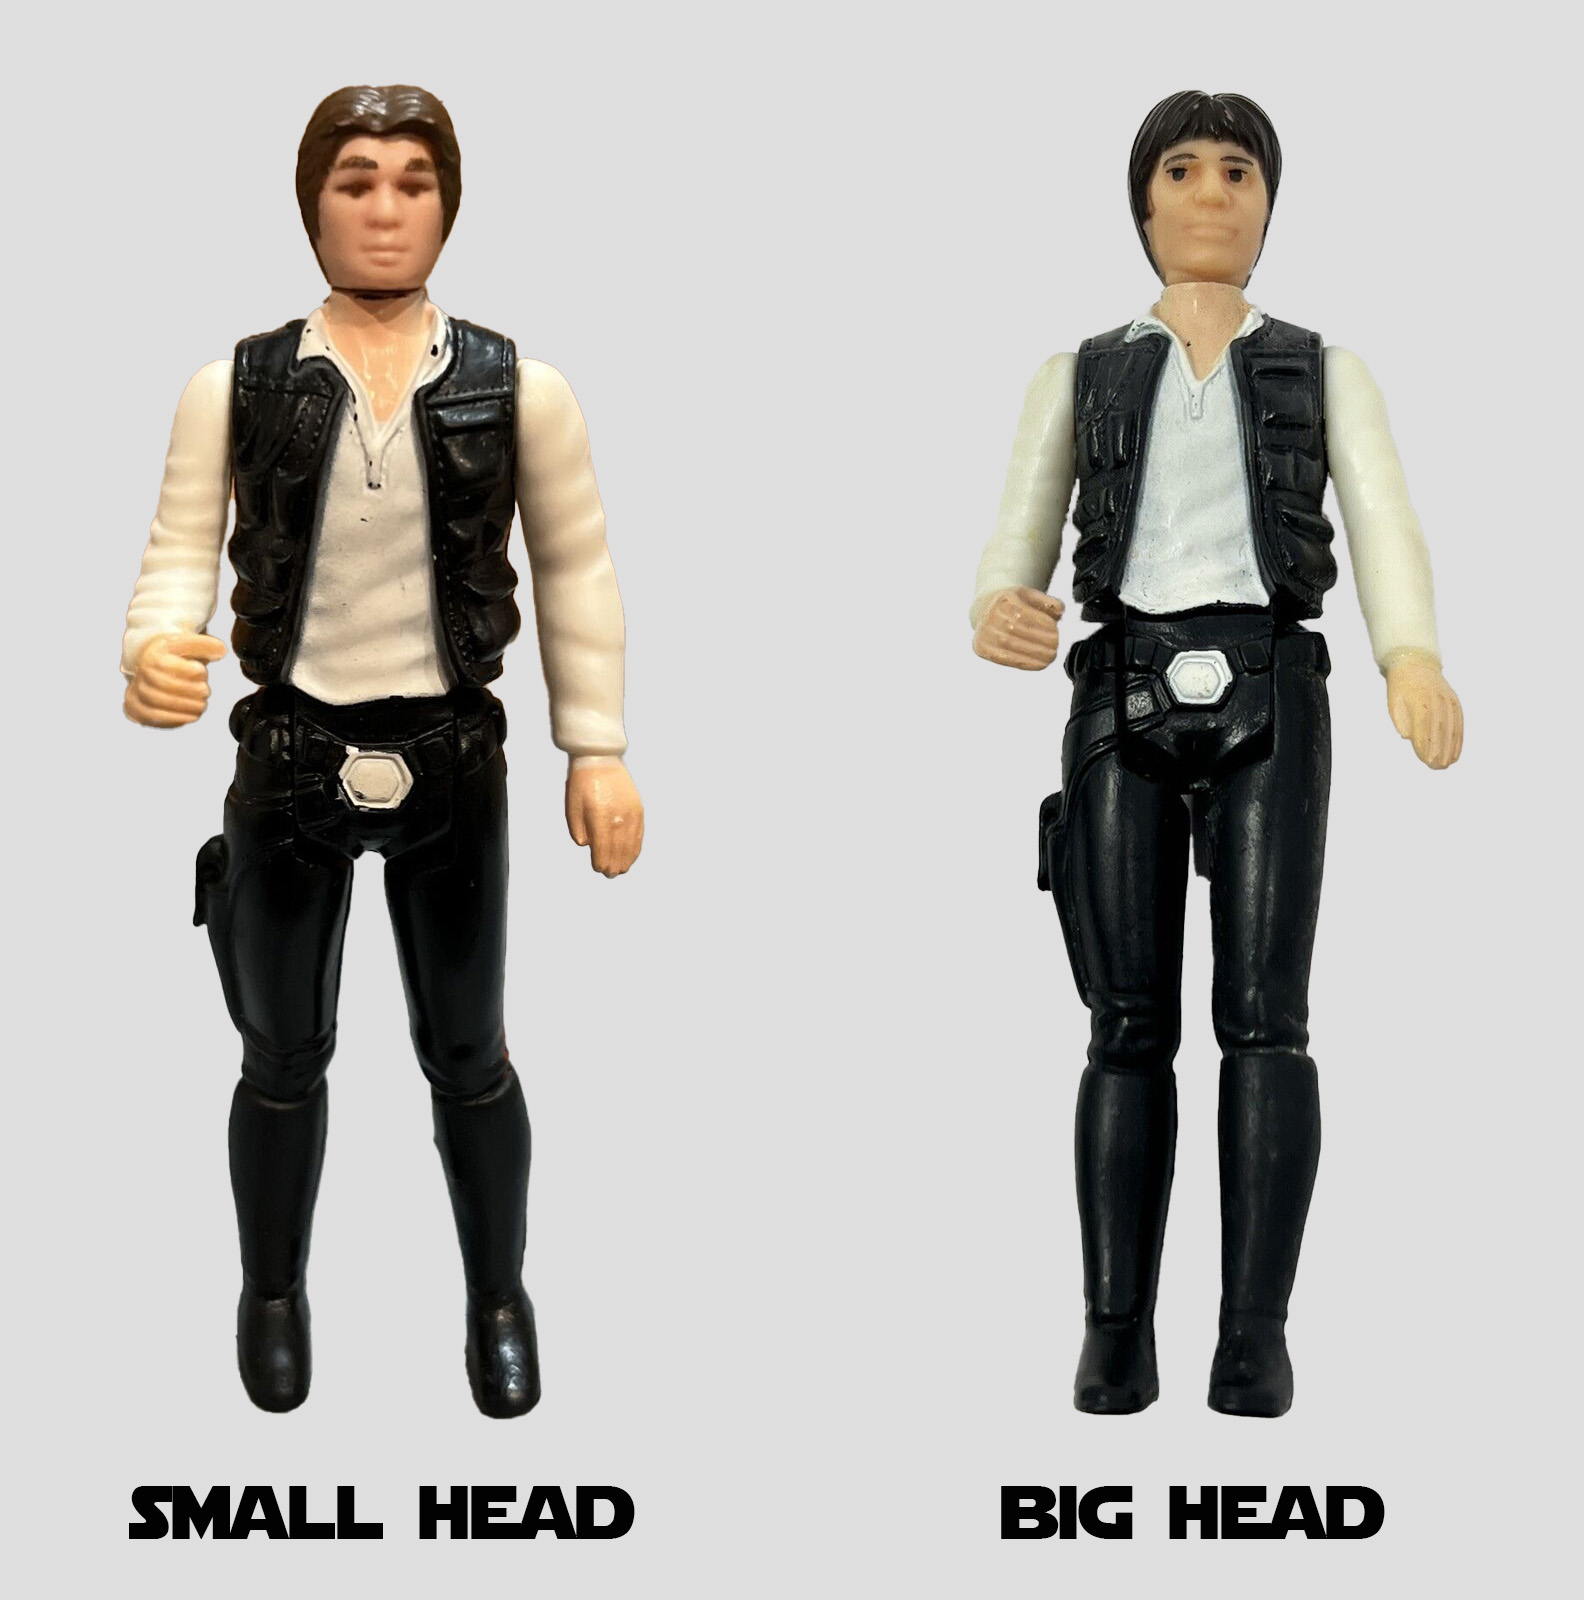 What's the difference between Big Head and Small Head Han? Small Head has a more proportional head, and Big Head is more bulbous.